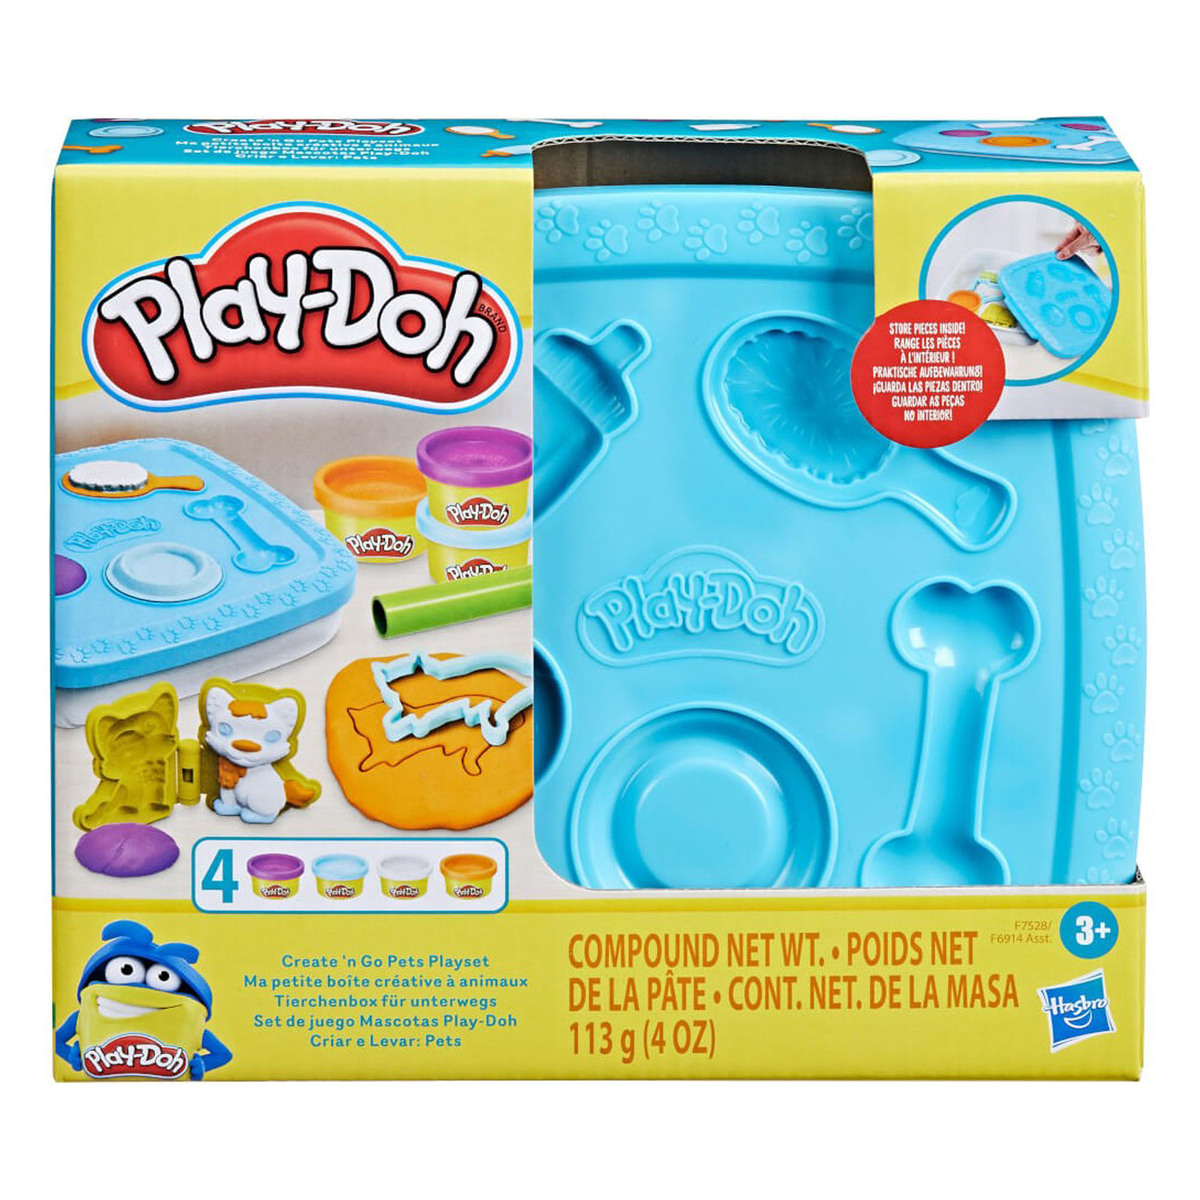 Playdoh Create & Go Pets Playset Art And Crafts Activity Toy for Kids, F6914